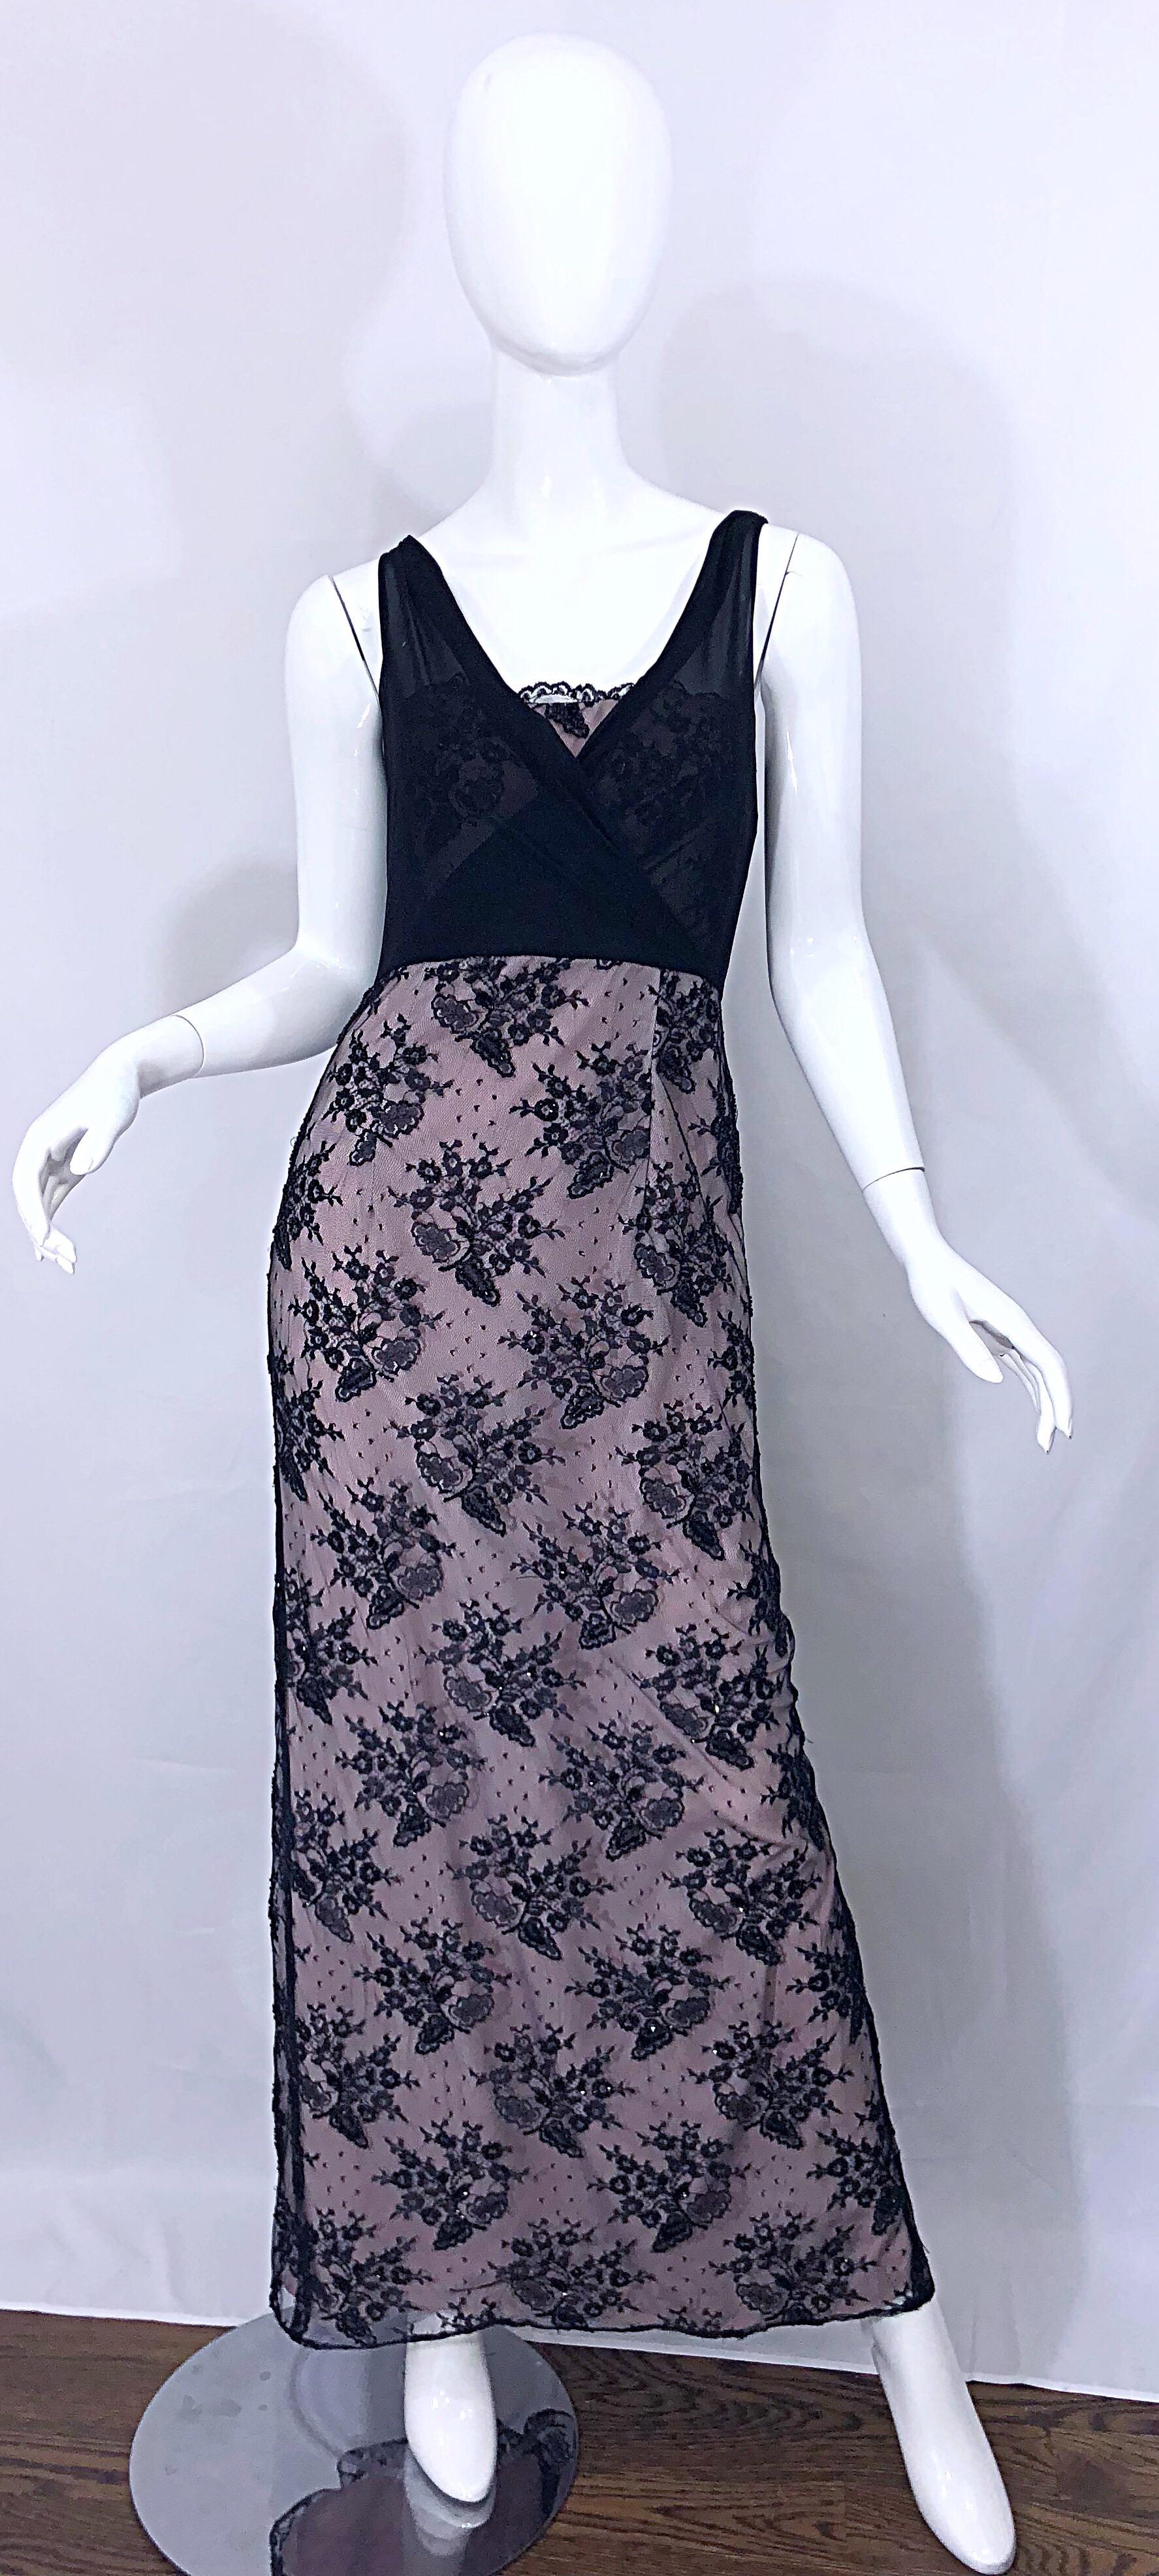 Gorgeous vintage BOB MACKIE black and pink beaded French lace evening gown! Features a light pink taffeta underlay. Black French lace covers the pink, and a semi sheer black chiffon bodice. Hidden zipper up the back with hook-and-eye closure.